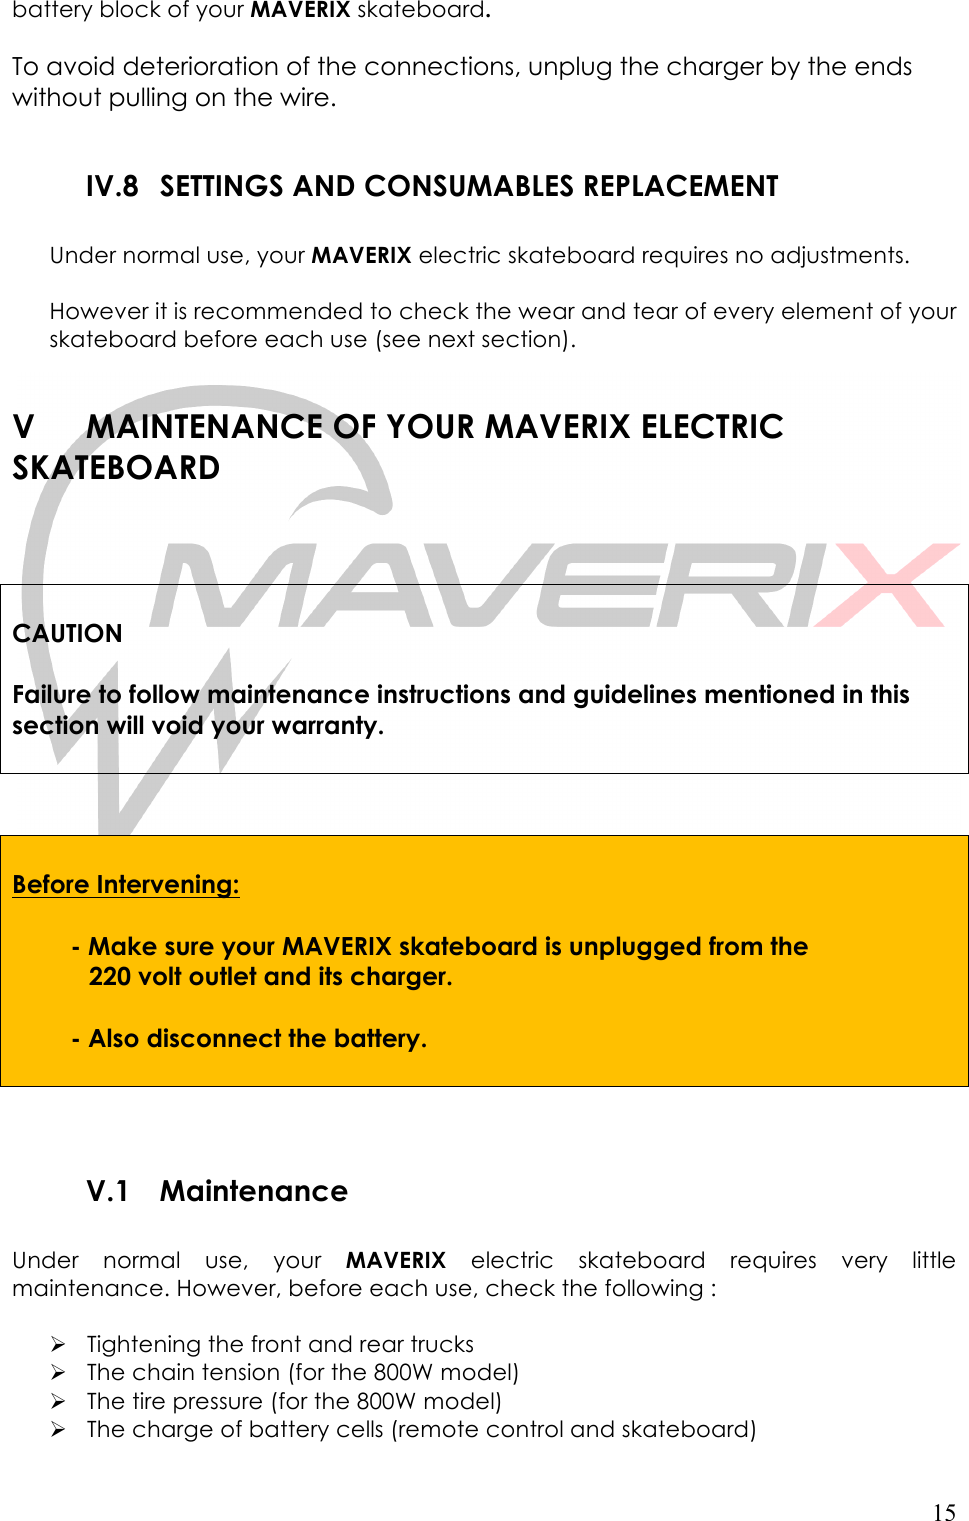   15 battery block of your MAVERIX skateboard.    To avoid deterioration of the connections, unplug the charger by the ends without pulling on the wire.  IV.8 SETTINGS AND CONSUMABLES REPLACEMENT  Under normal use, your MAVERIX electric skateboard requires no adjustments.  However it is recommended to check the wear and tear of every element of your skateboard before each use (see next section).  V MAINTENANCE OF YOUR MAVERIX ELECTRIC      SKATEBOARD     CAUTION  Failure to follow maintenance instructions and guidelines mentioned in this section will void your warranty.      Before Intervening:      - Make sure your MAVERIX skateboard is unplugged from the            220 volt outlet and its charger.     - Also disconnect the battery.         V.1 Maintenance  Under  normal  use,  your  MAVERIX electric  skateboard  requires  very  little maintenance. However, before each use, check the following :  ! Tightening the front and rear trucks ! The chain tension (for the 800W model) ! The tire pressure (for the 800W model) ! The charge of battery cells (remote control and skateboard) 